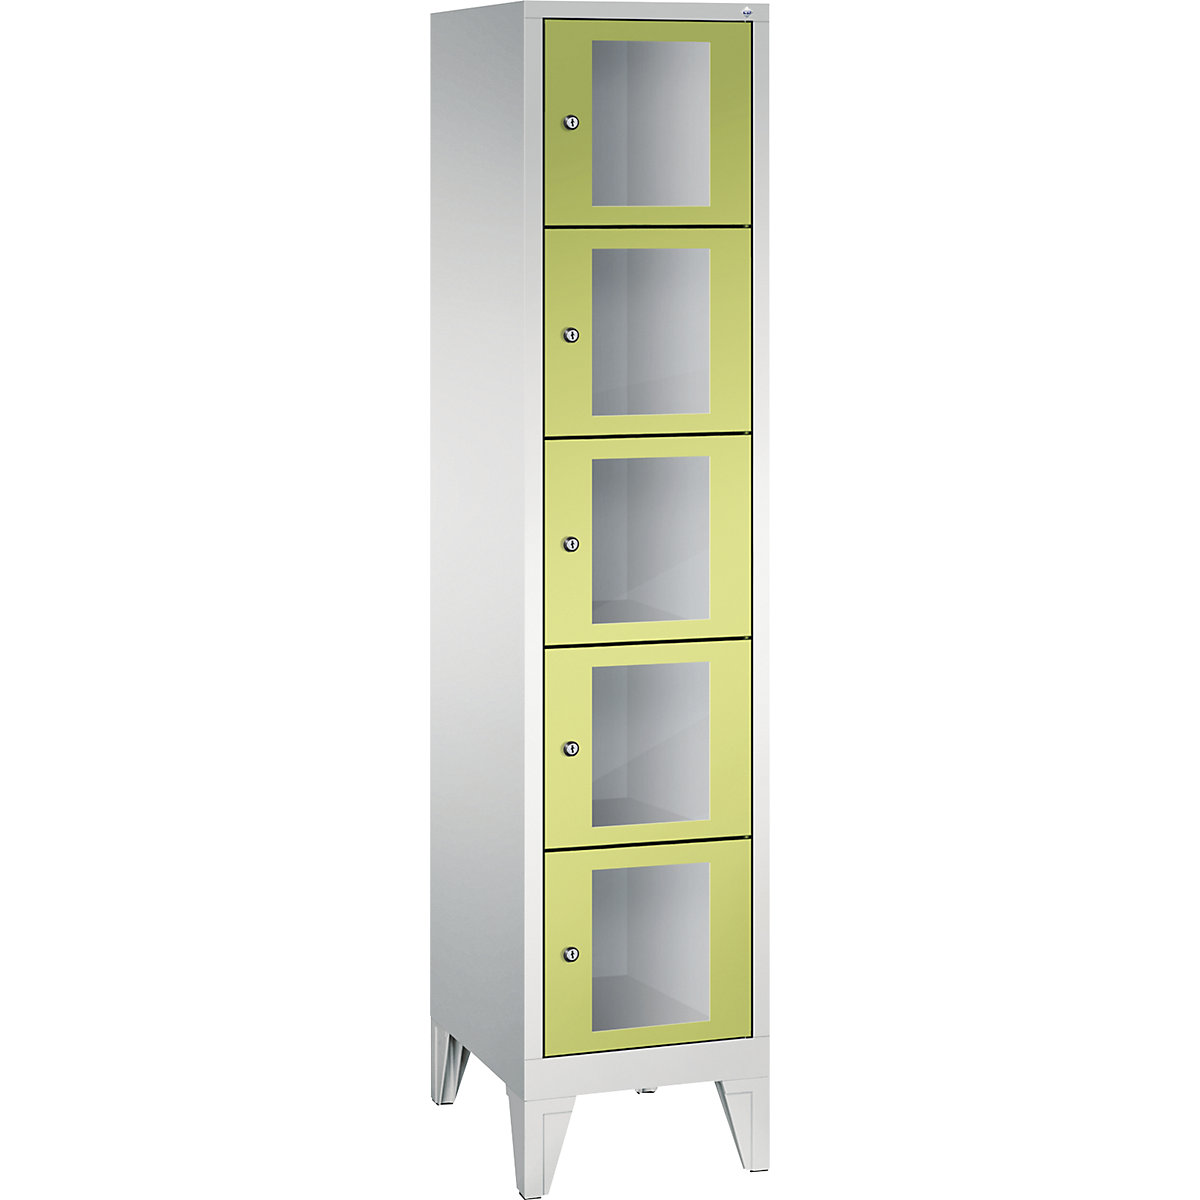 C+P – CLASSIC locker unit, compartment height 295 mm, with feet, 5 compartments, width 420 mm, viridian green door